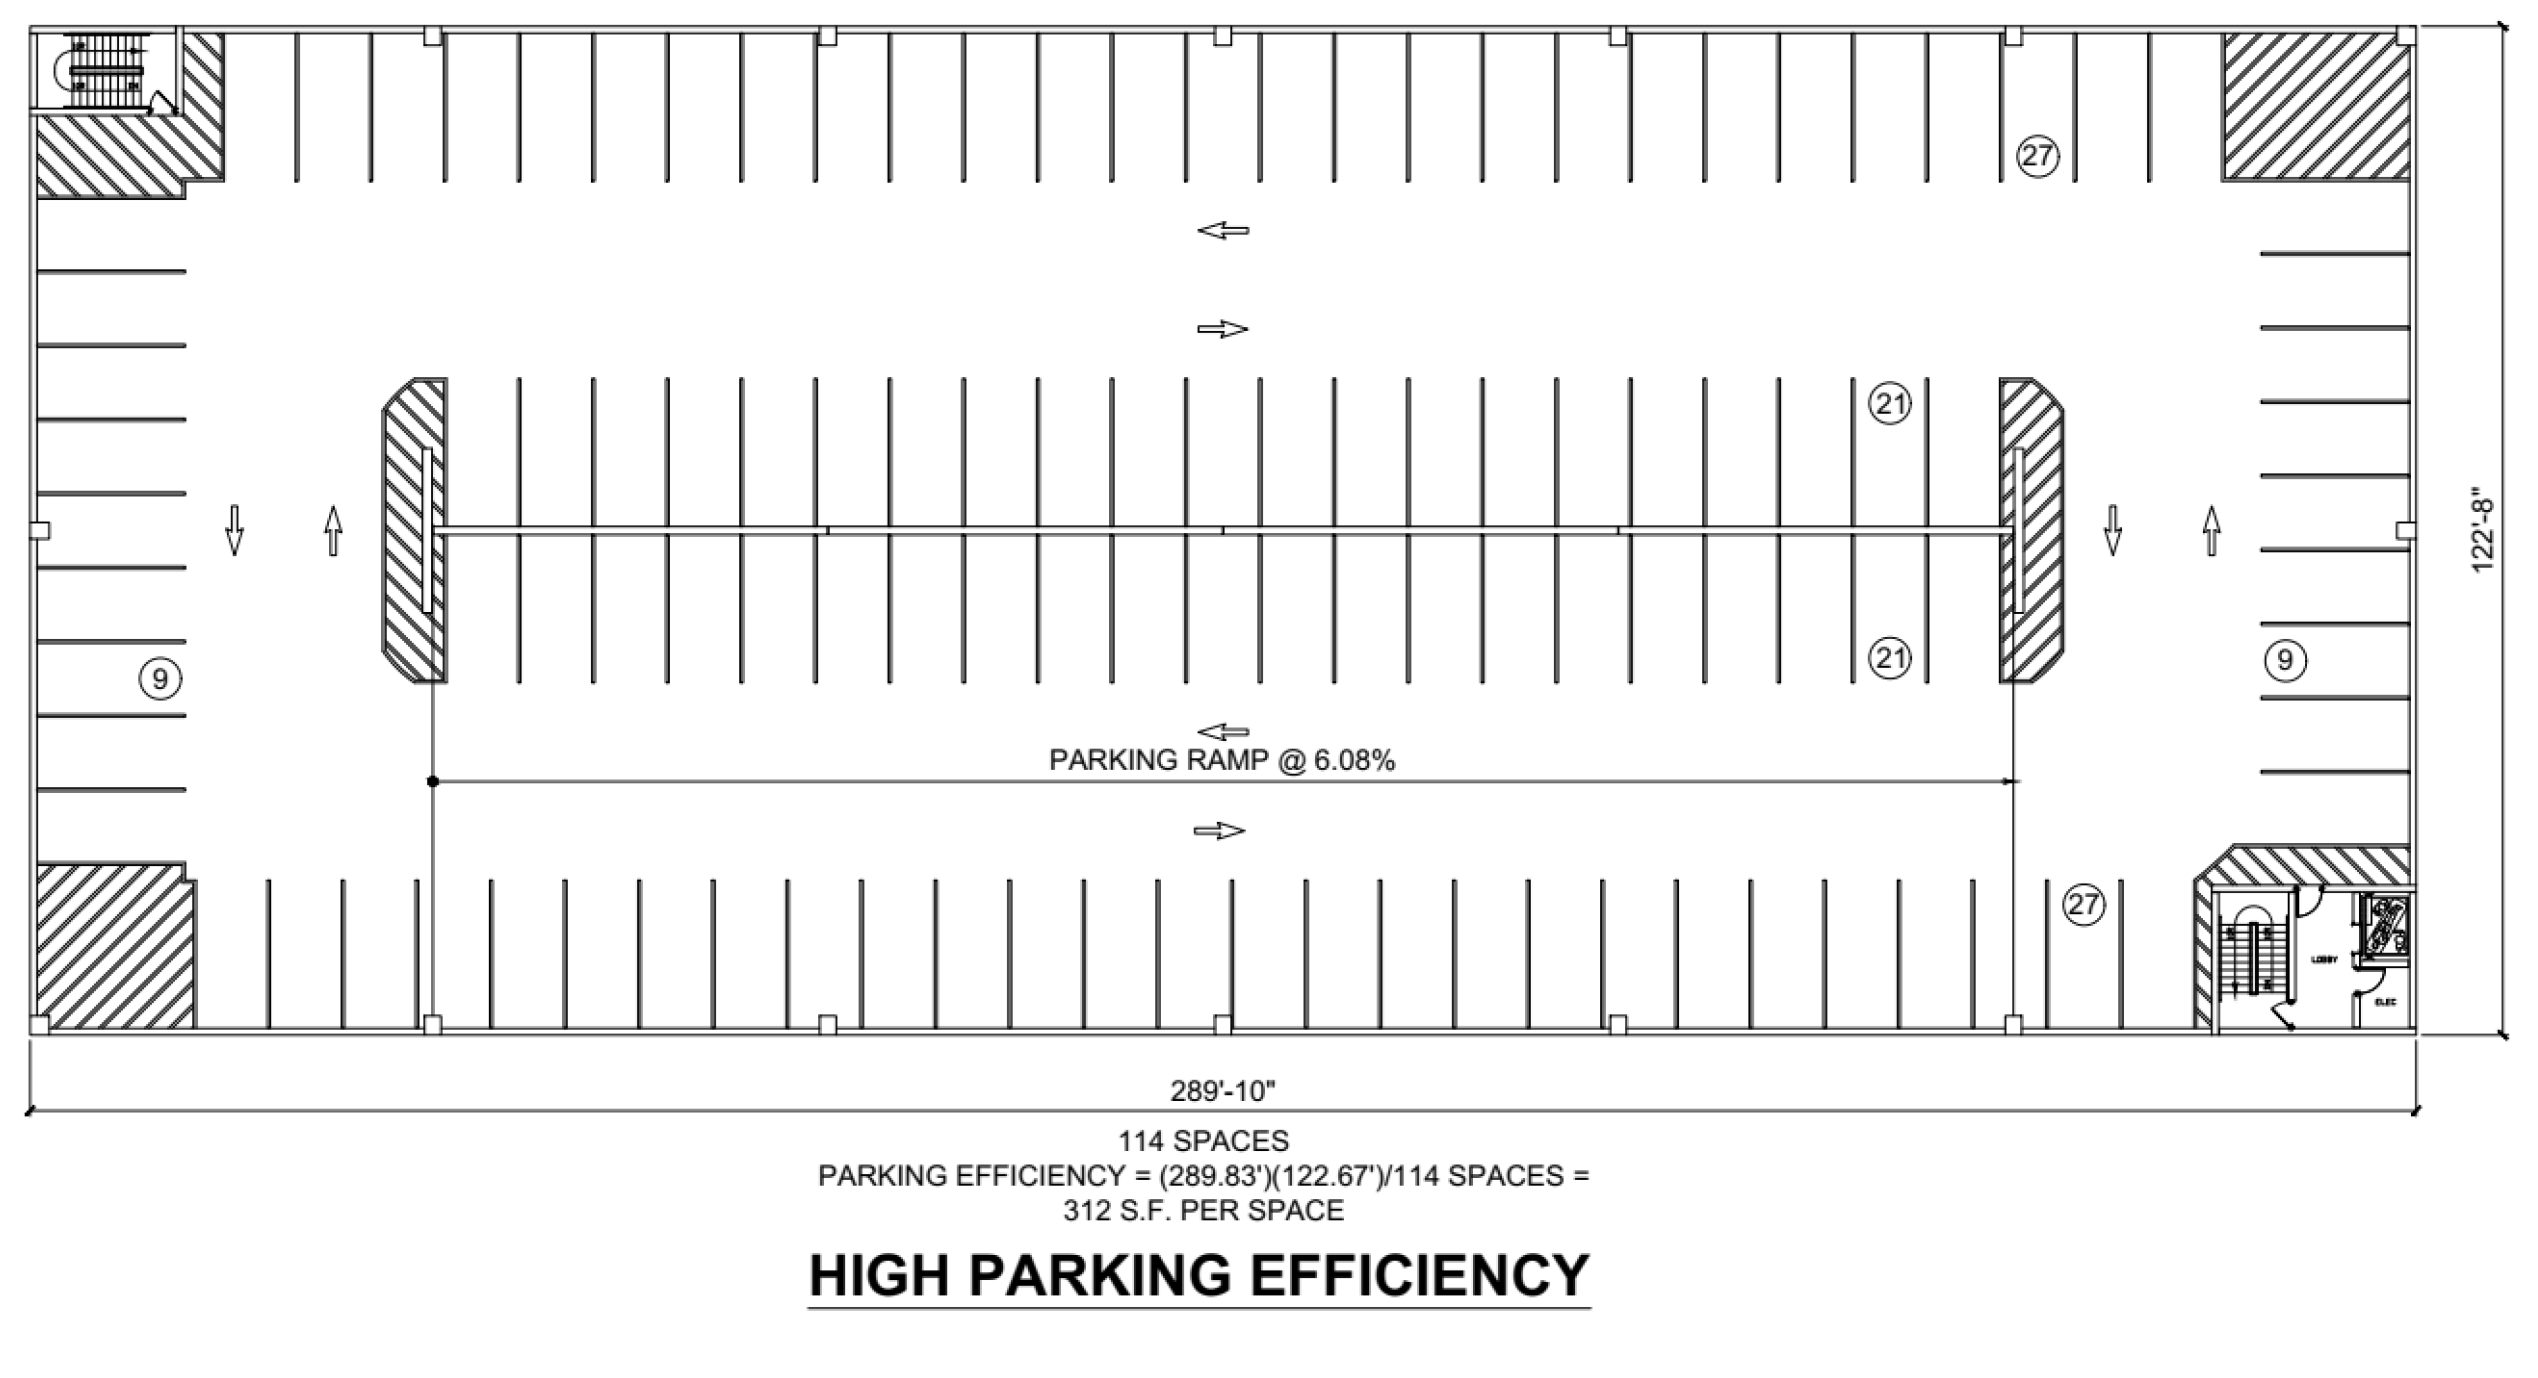 Example Of High Parking Efficiency